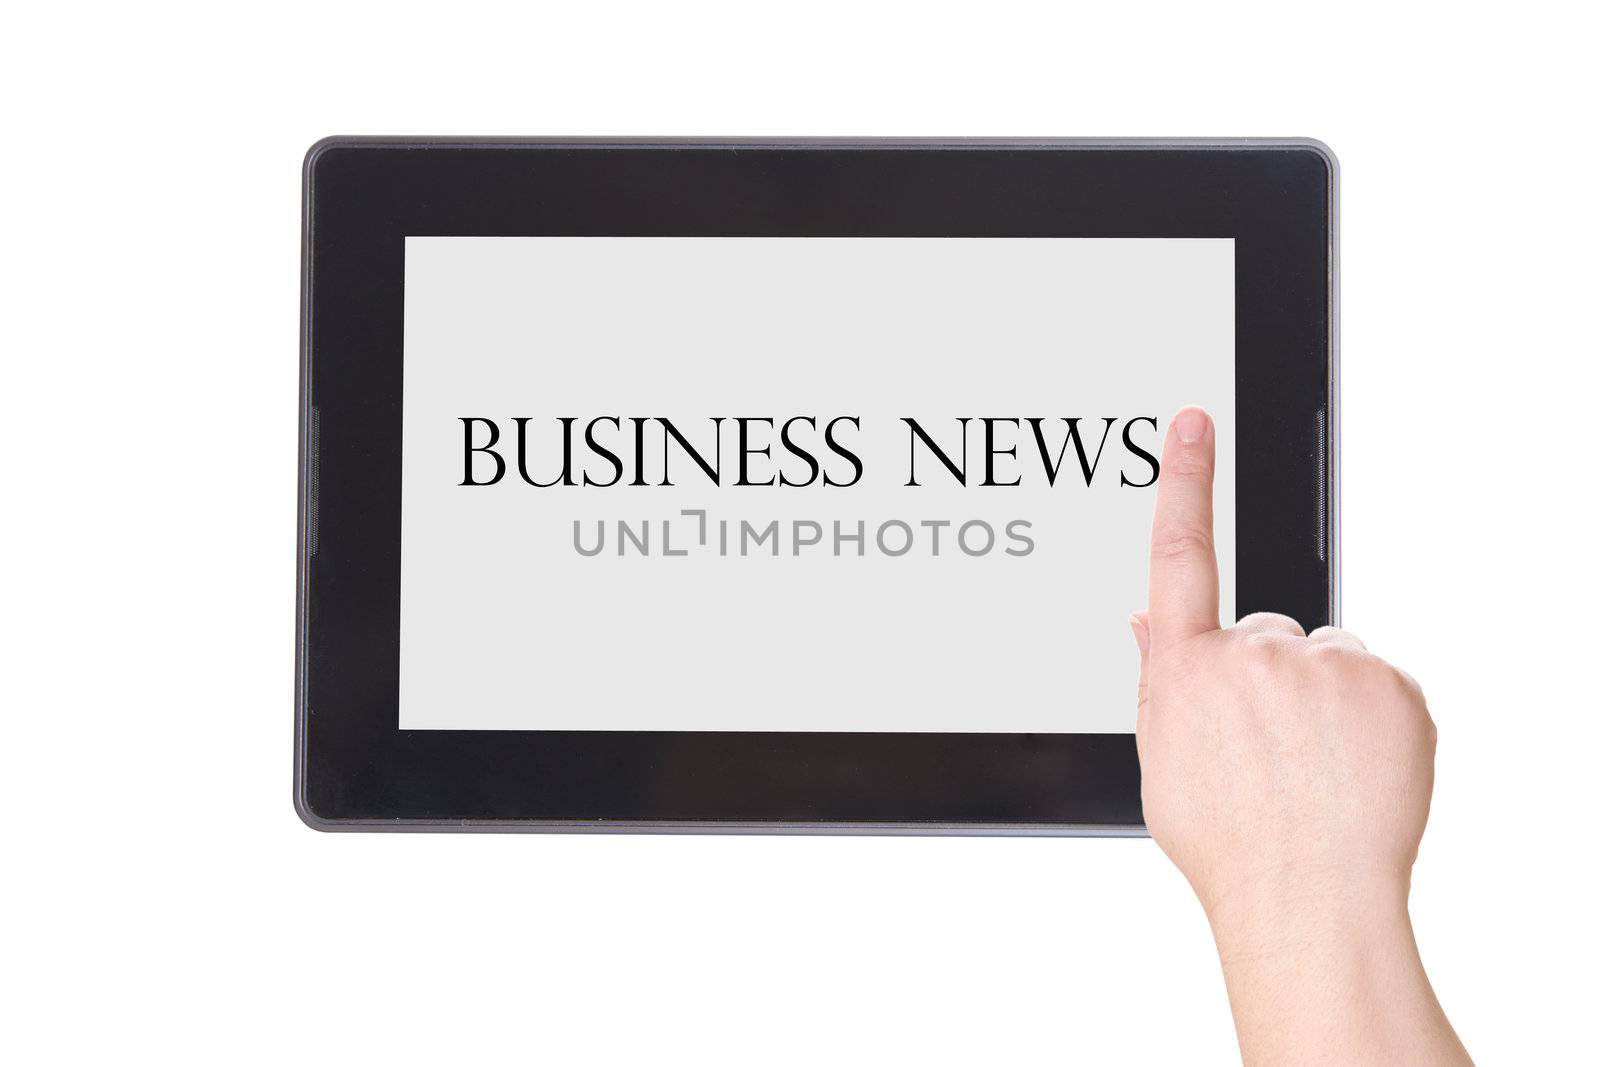 Electronic notebook PC. The business news by petrkurgan